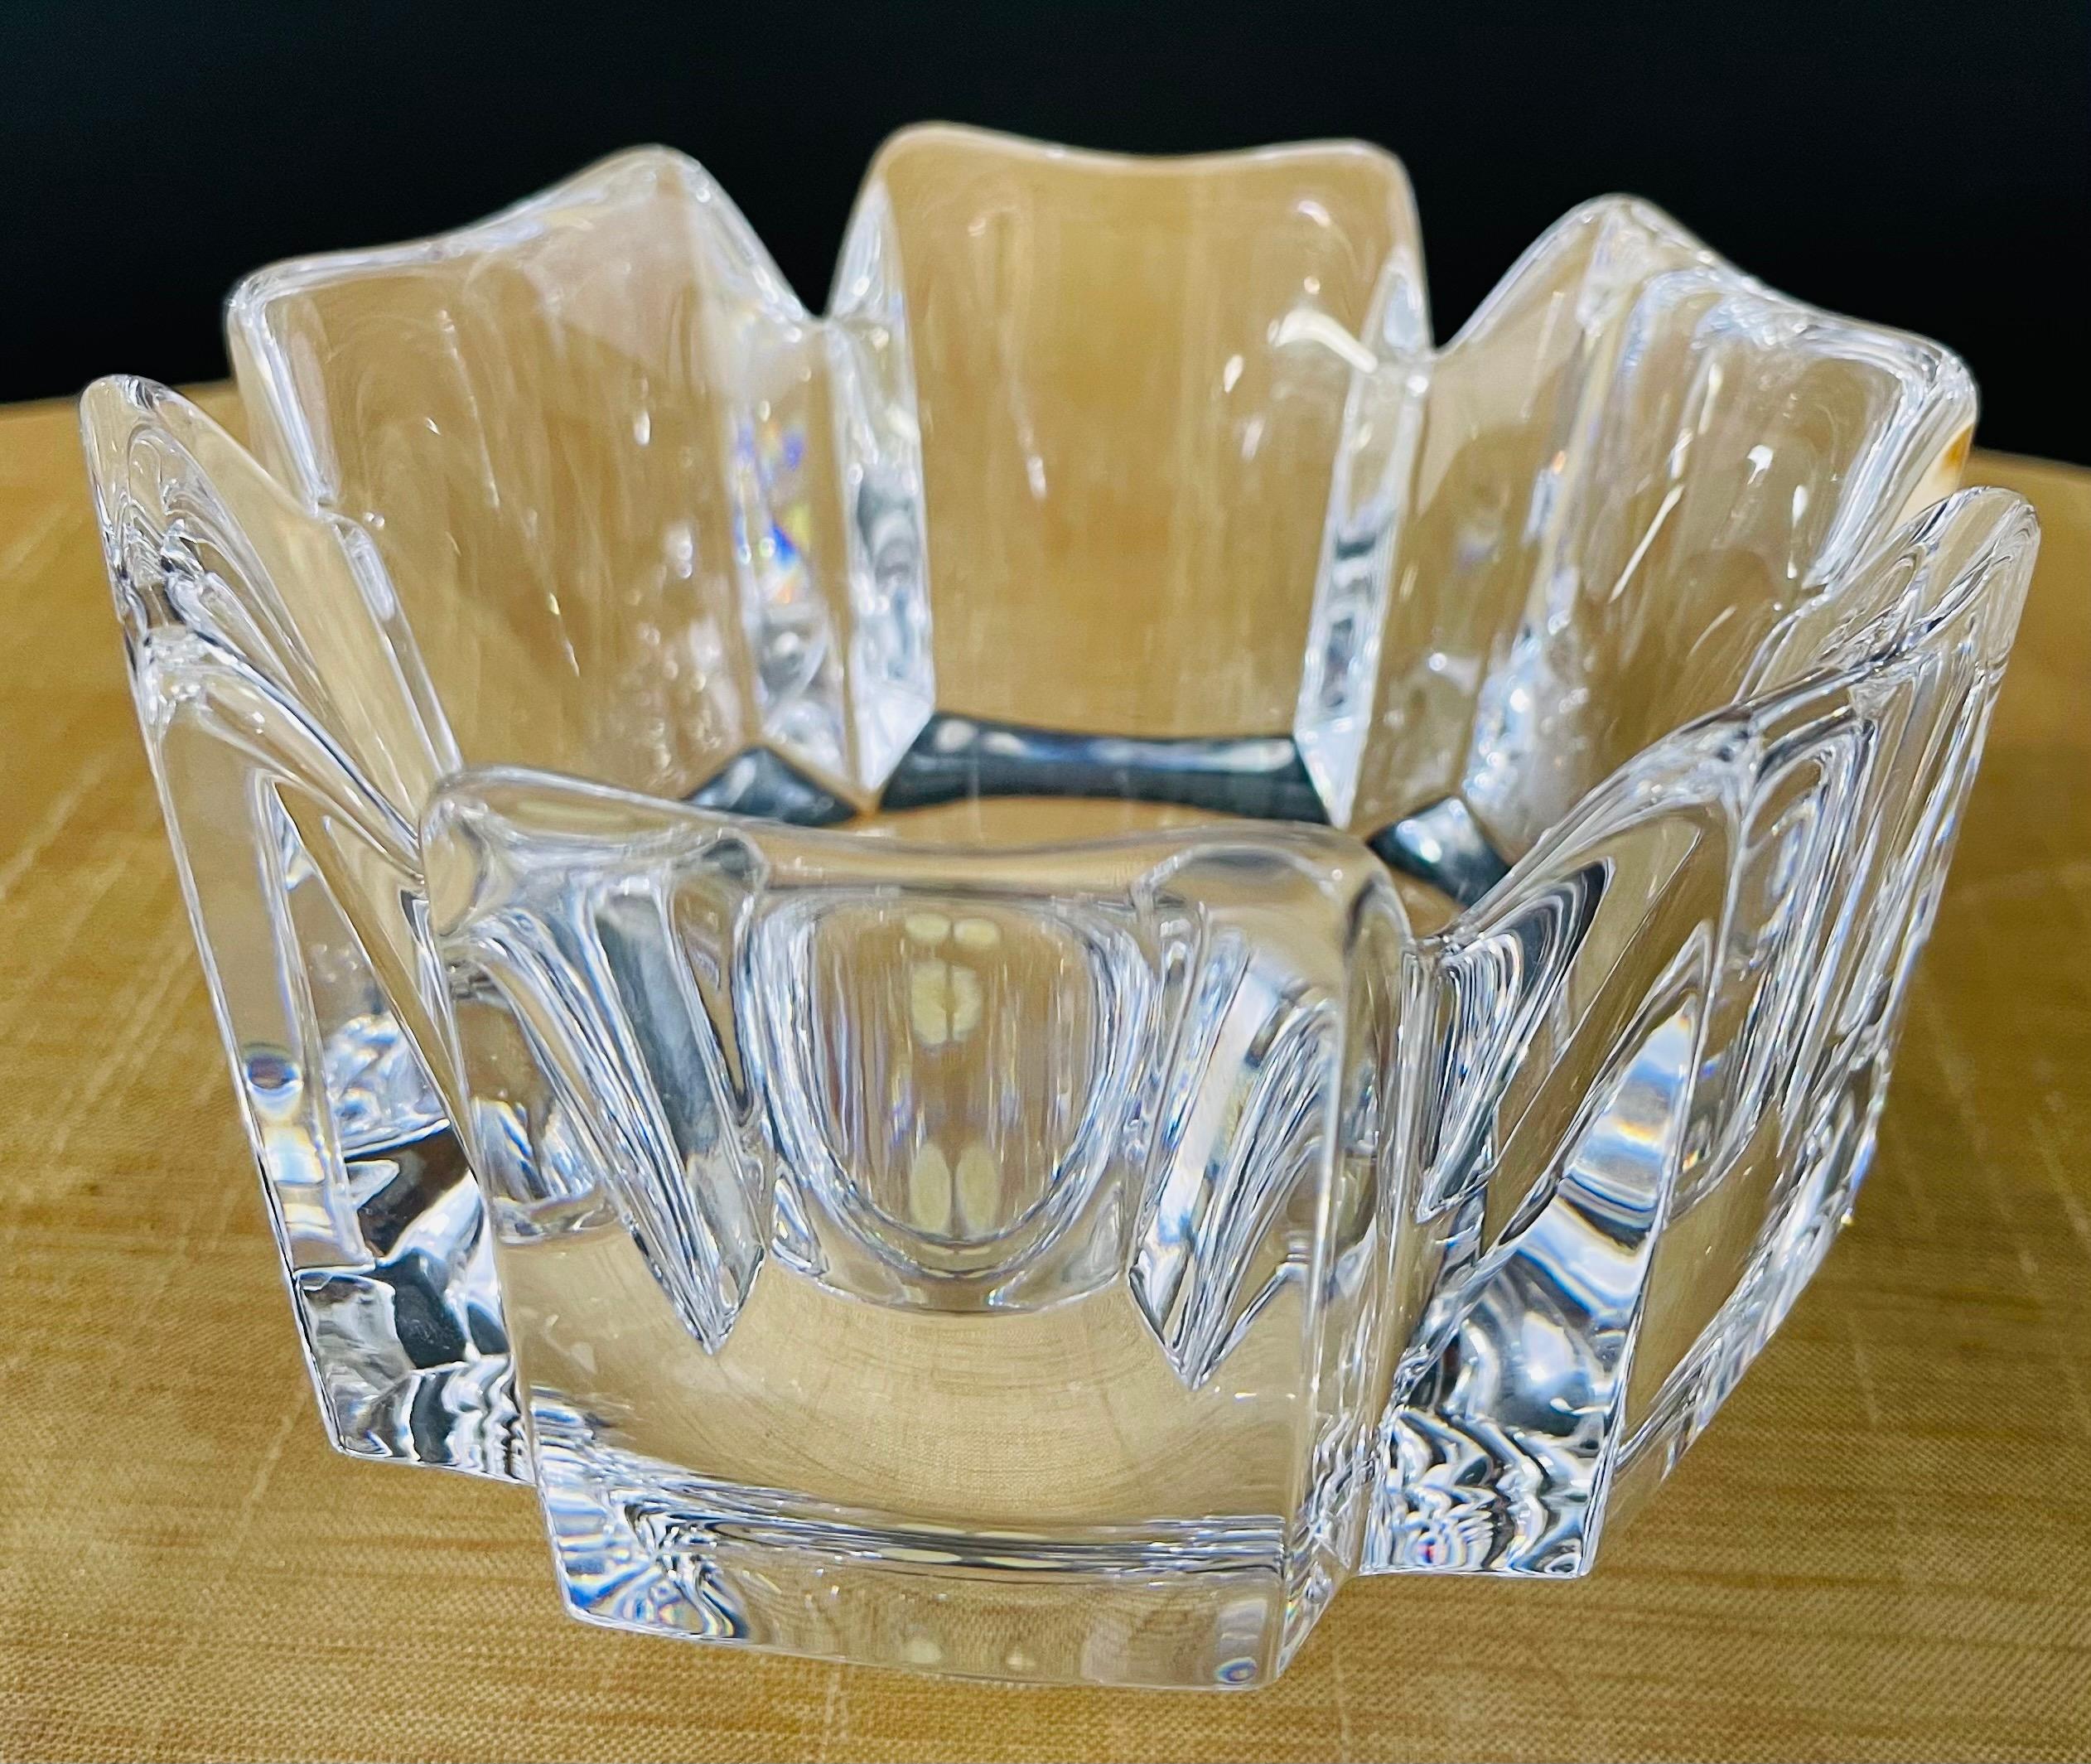 Crystal Small Dishes or Ashtrays, a Set of 7 6